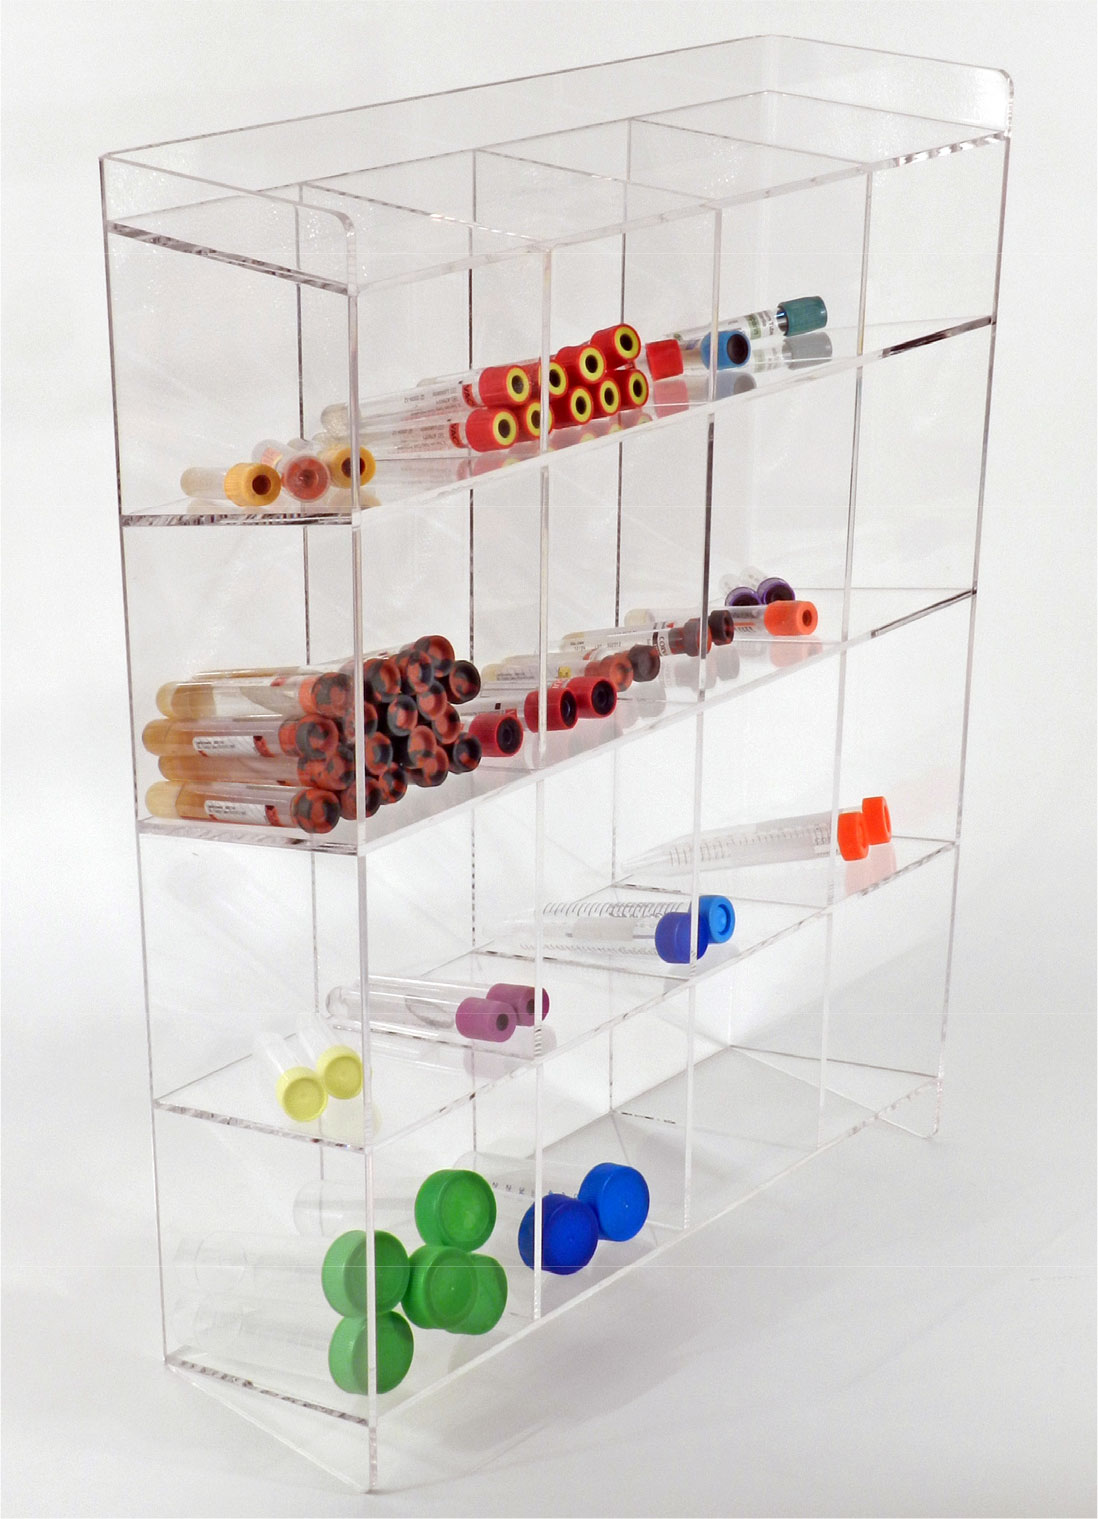 Vacutainer Tube Organizer XL<p><a href="images/red.pngtitle="In Stock & Ready for immediate shipping."></a><img src="images/red.png" alt="In Stock & Ready for immediate shipping." title="In Stock & Ready for immediate shipping." width="227" height="50" /></p>